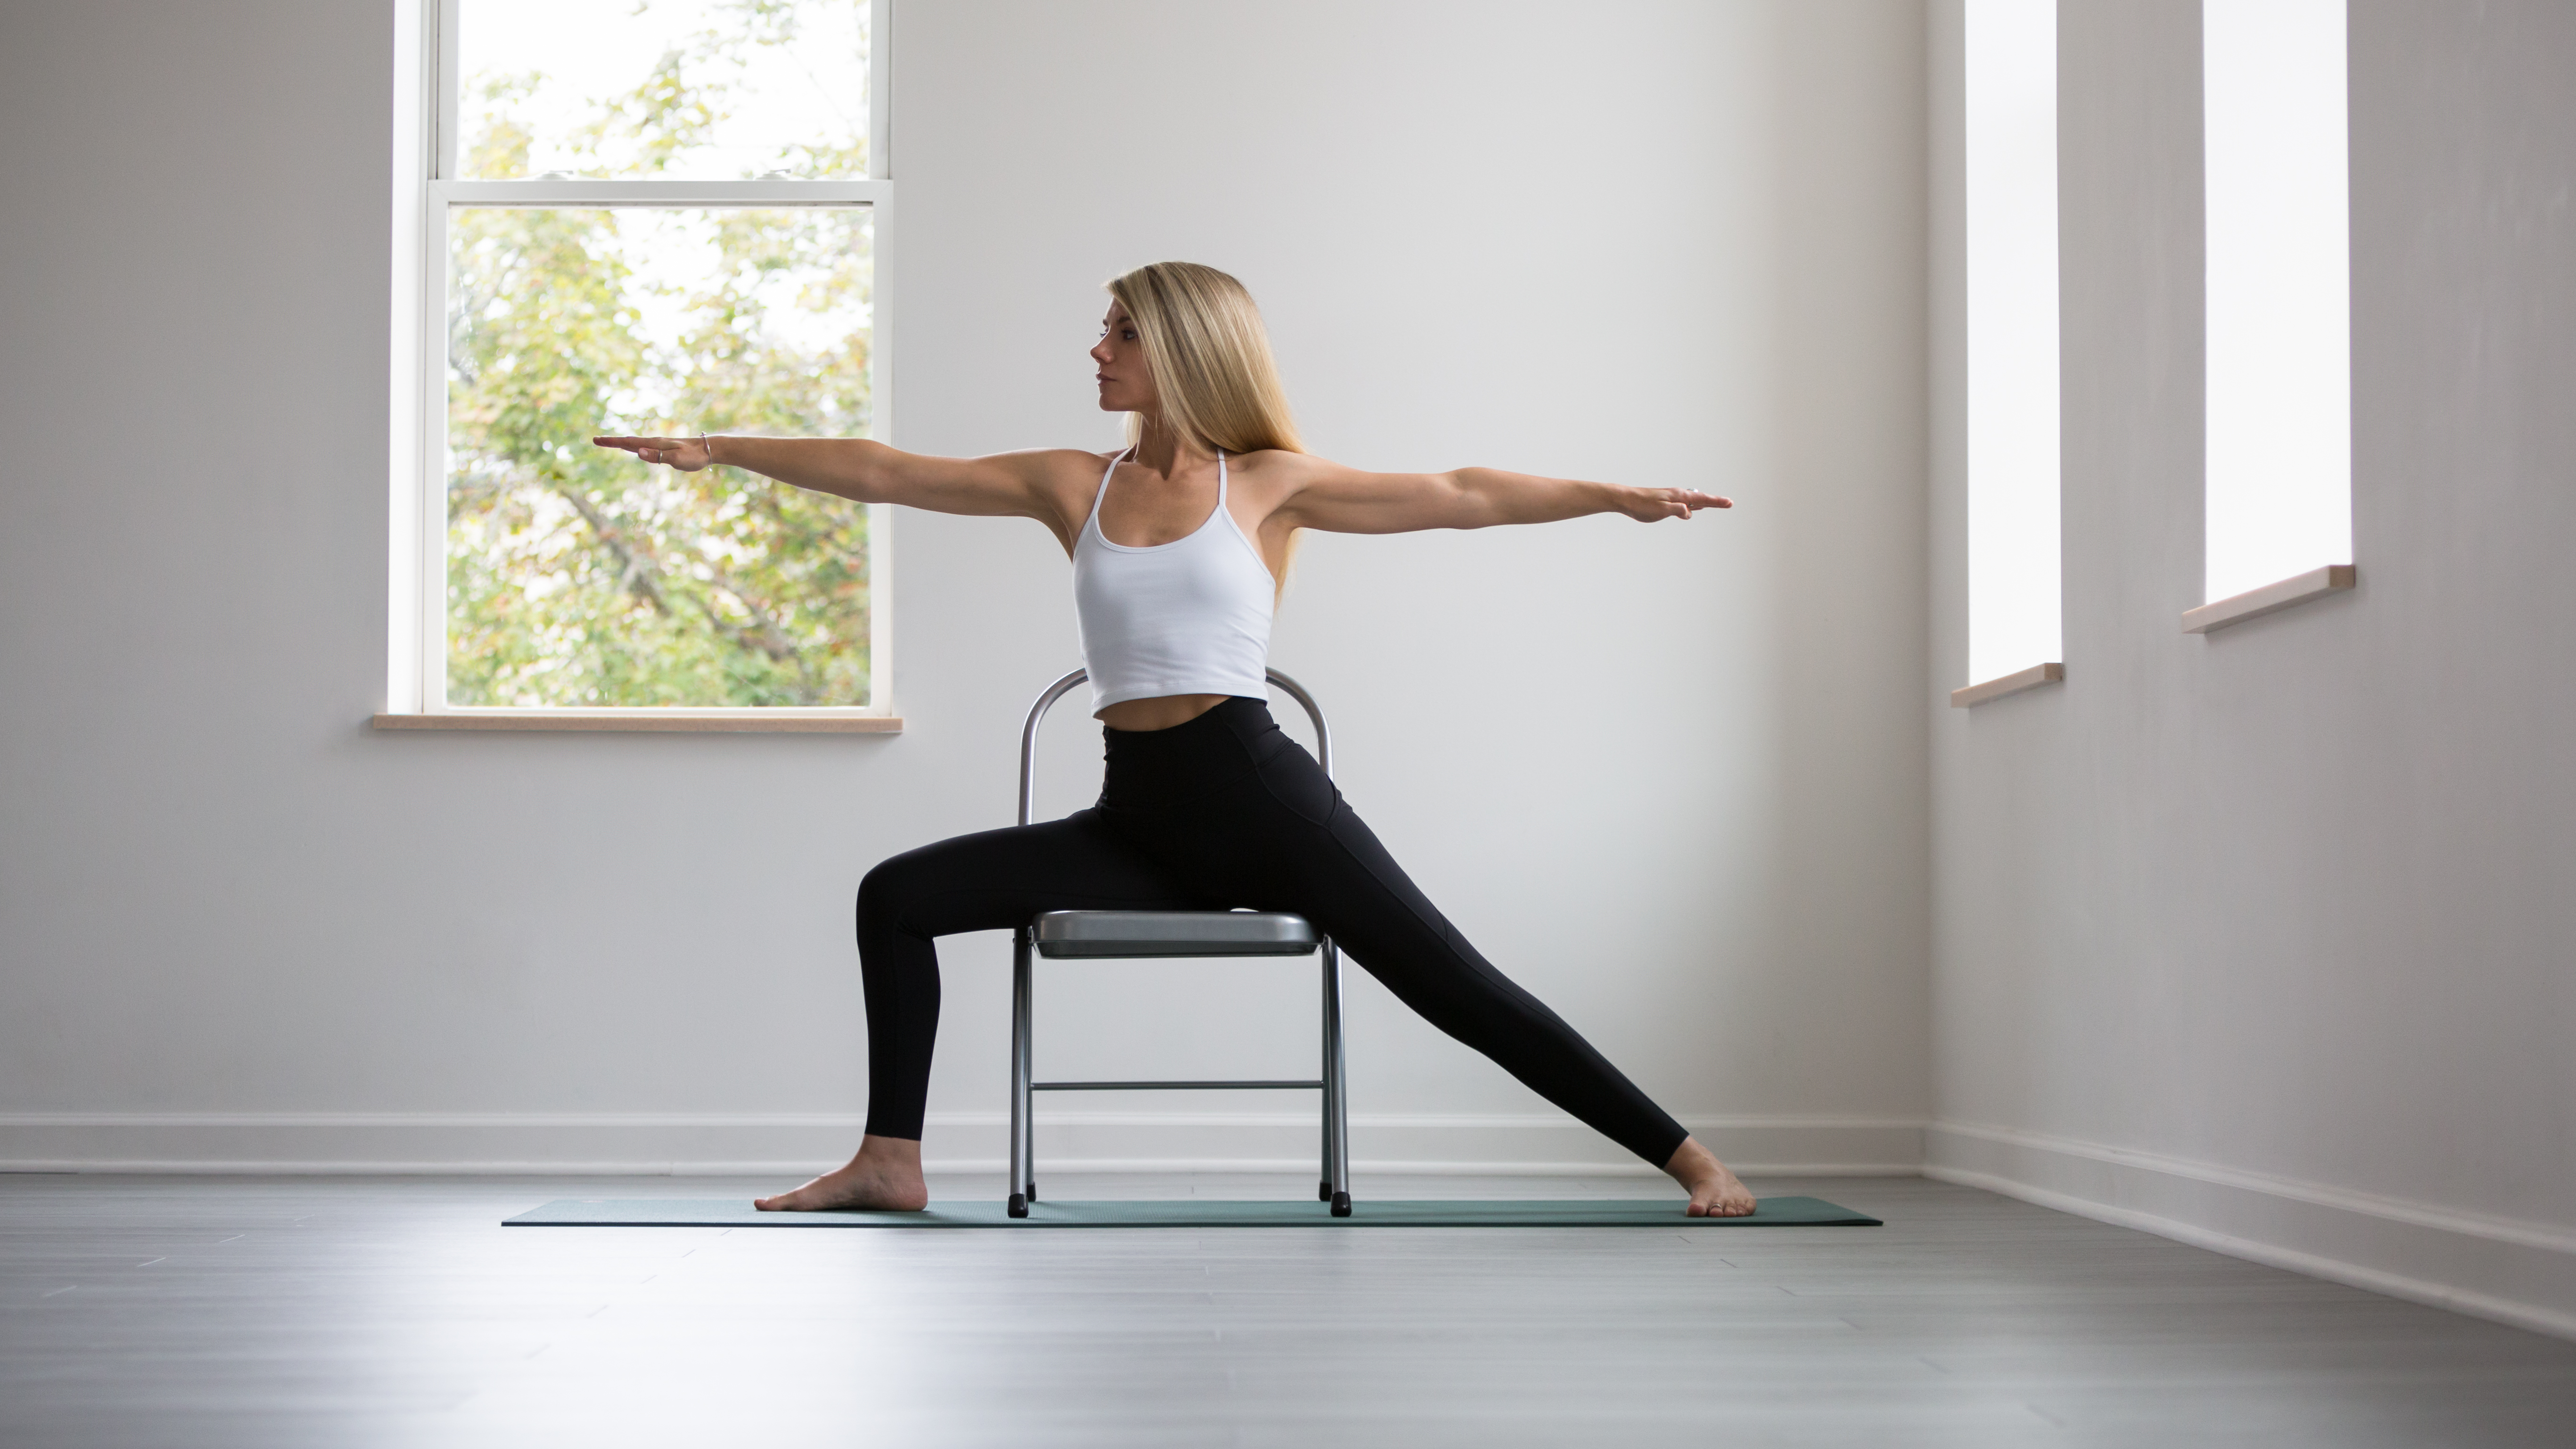 This chair pose variation will help you handstand in yoga class | Well+Good